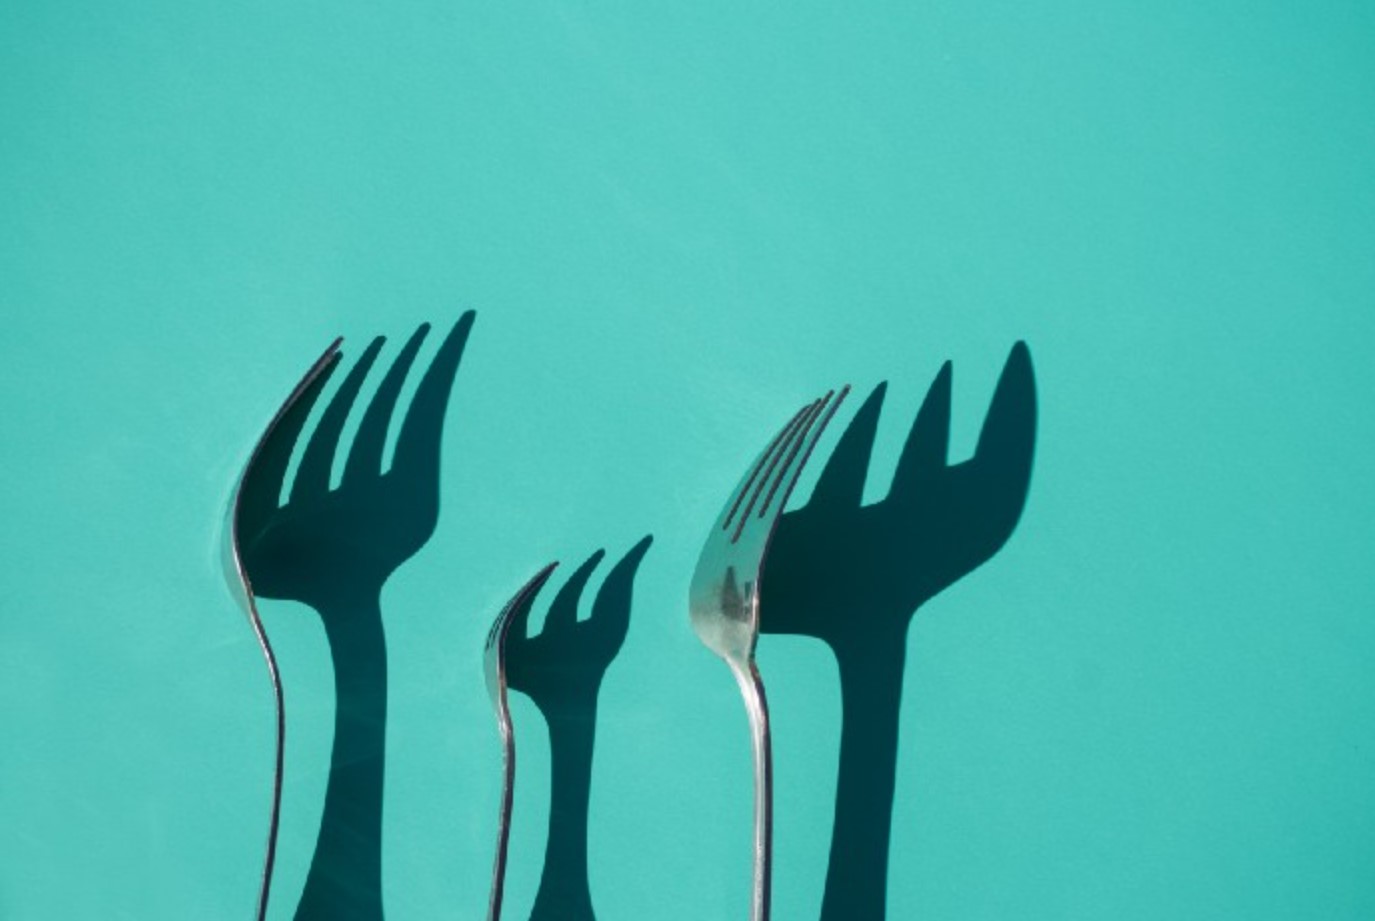 forks with shadows